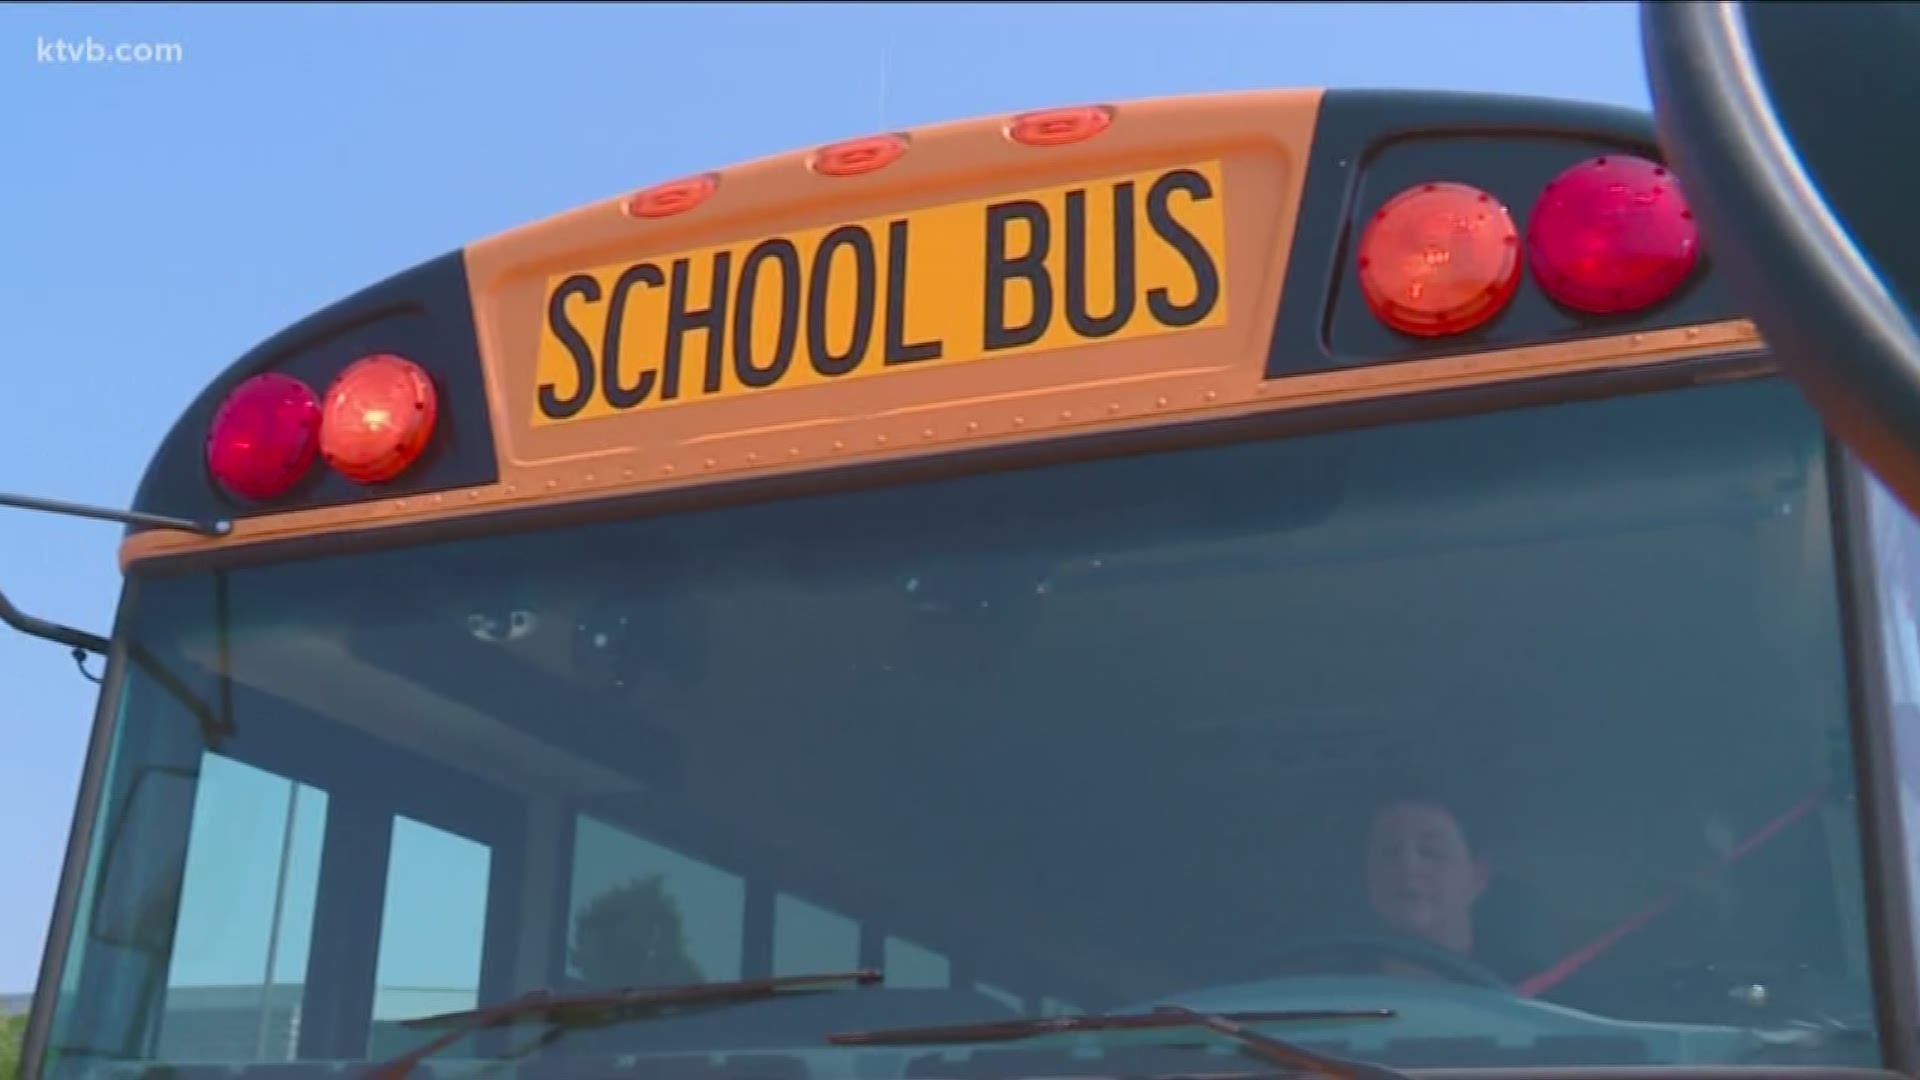 School bus companies and school districts across the United States and in Idaho are facing a shortage of school bus drivers - and a strong economy is partly to blame.